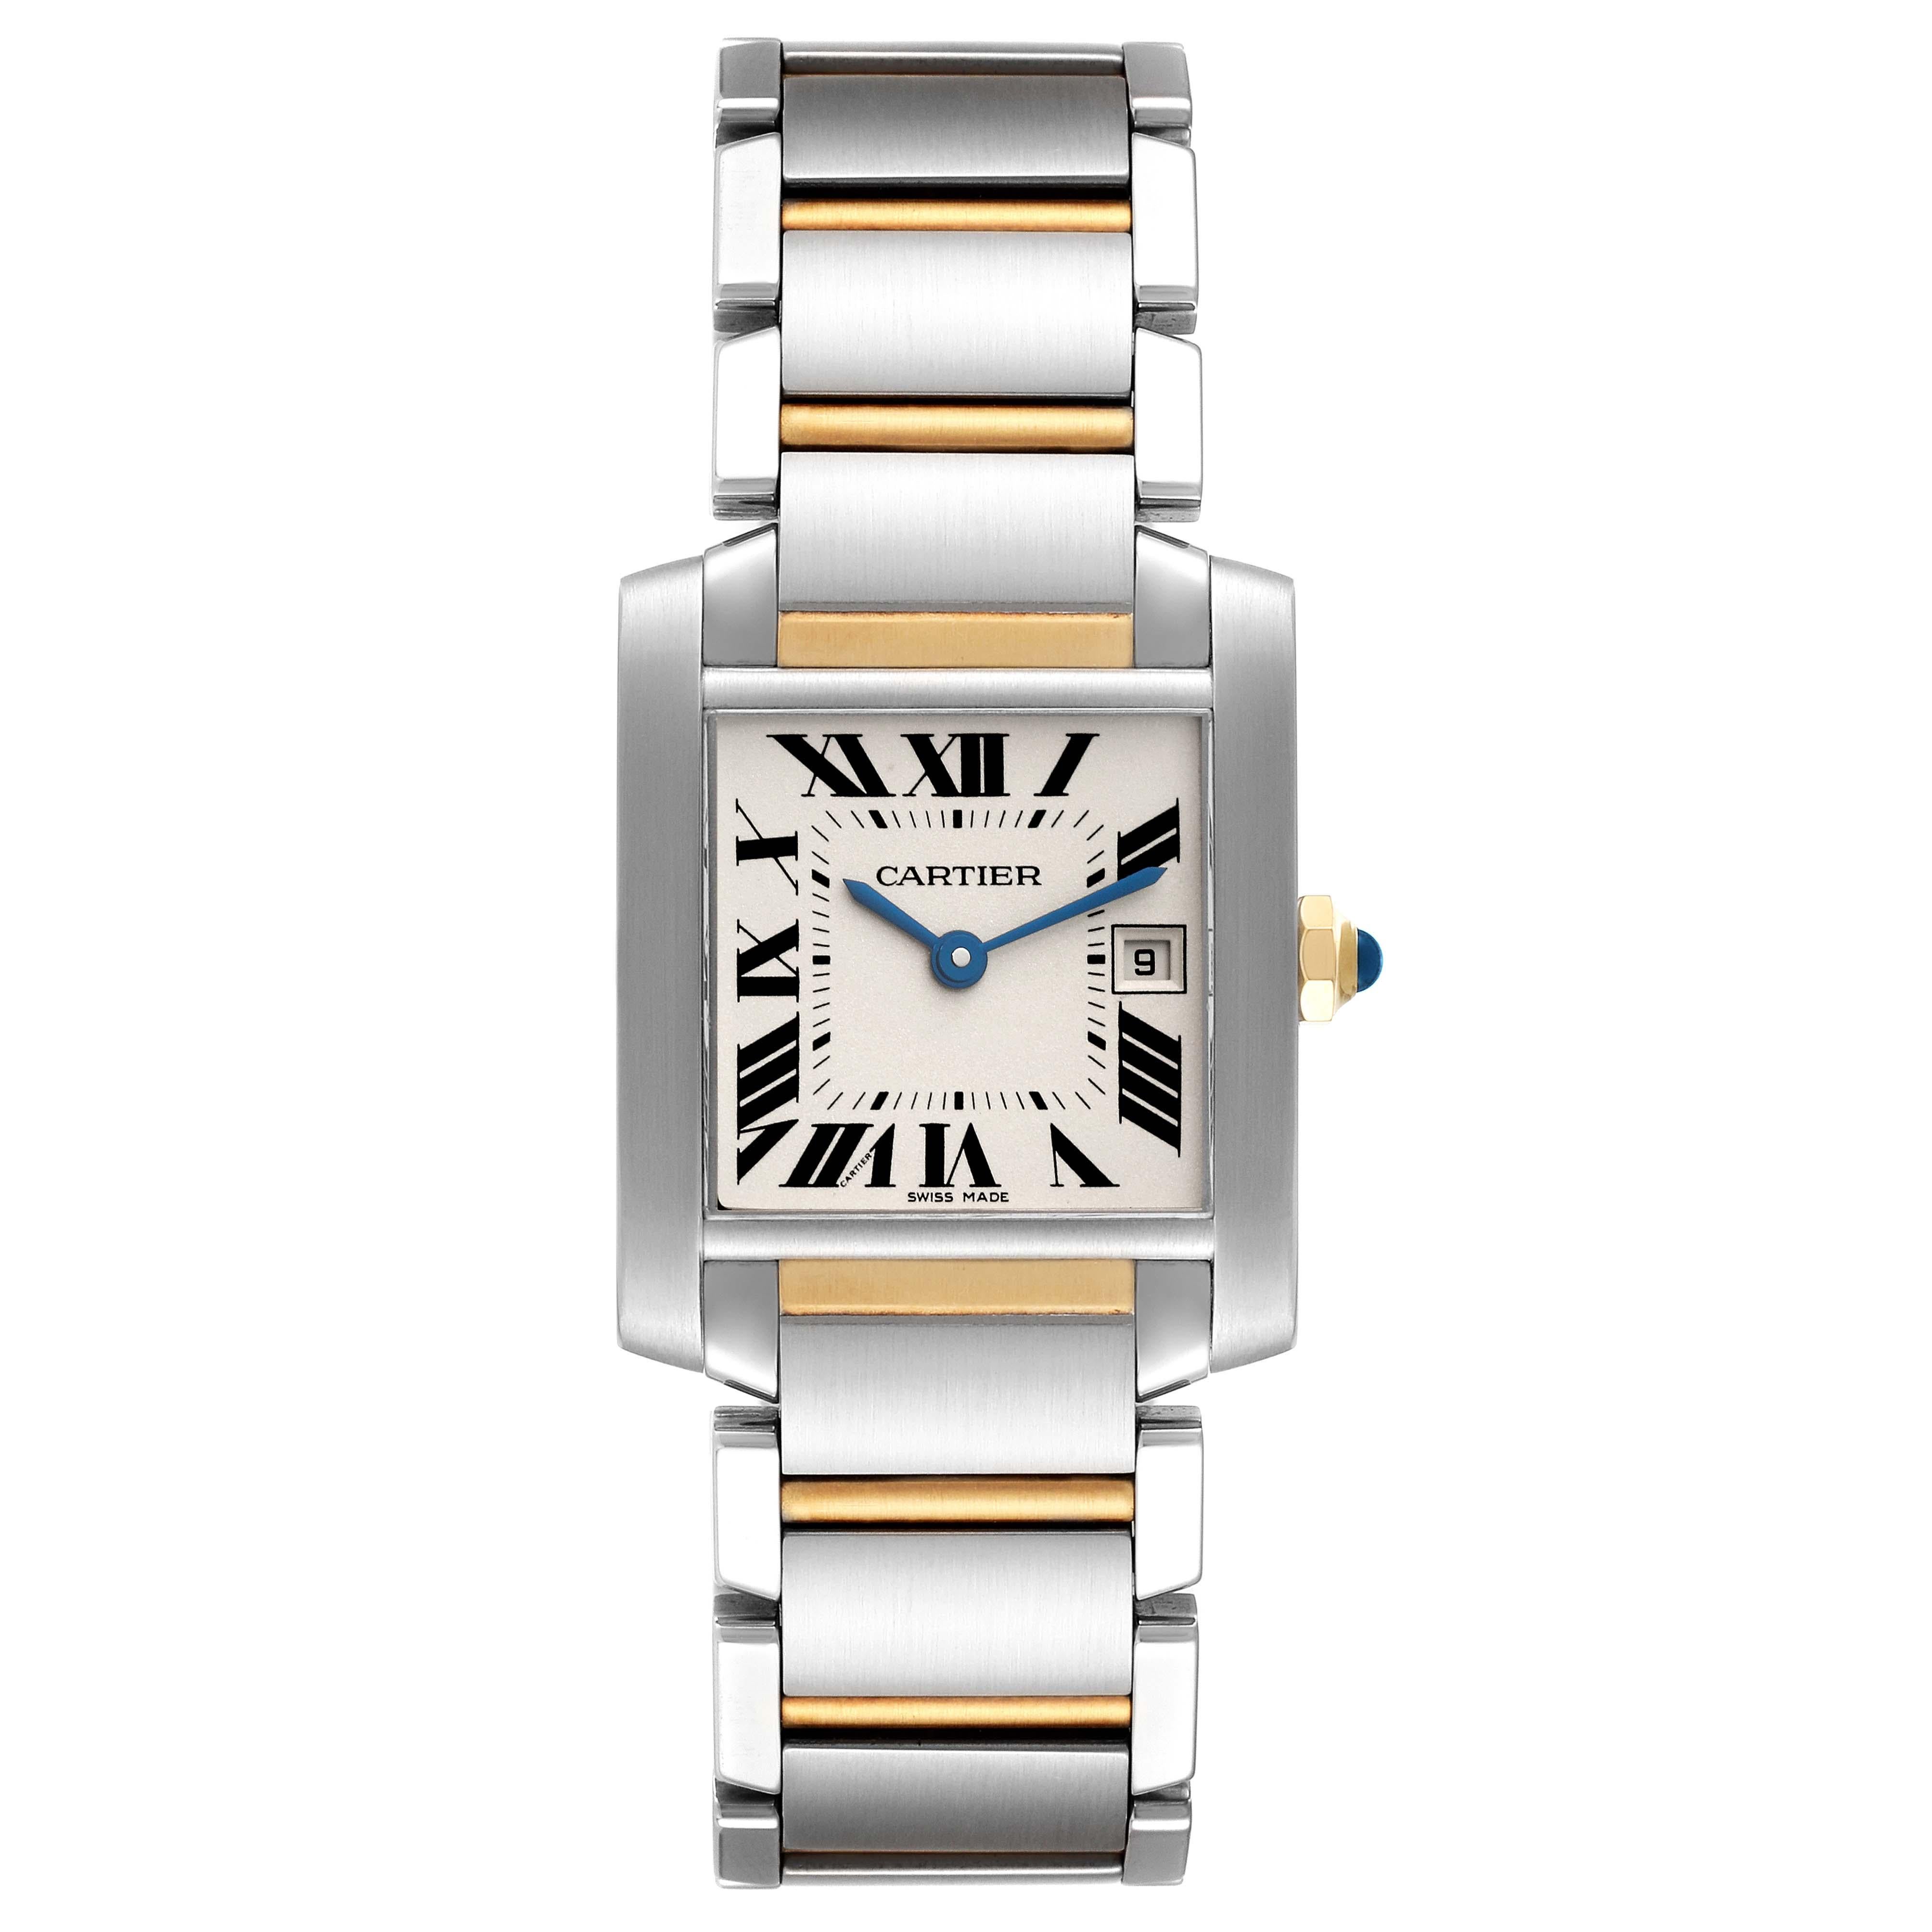 Cartier Tank Francaise Midsize Steel Yellow Gold Ladies Watch W51012Q4 In Excellent Condition For Sale In Atlanta, GA